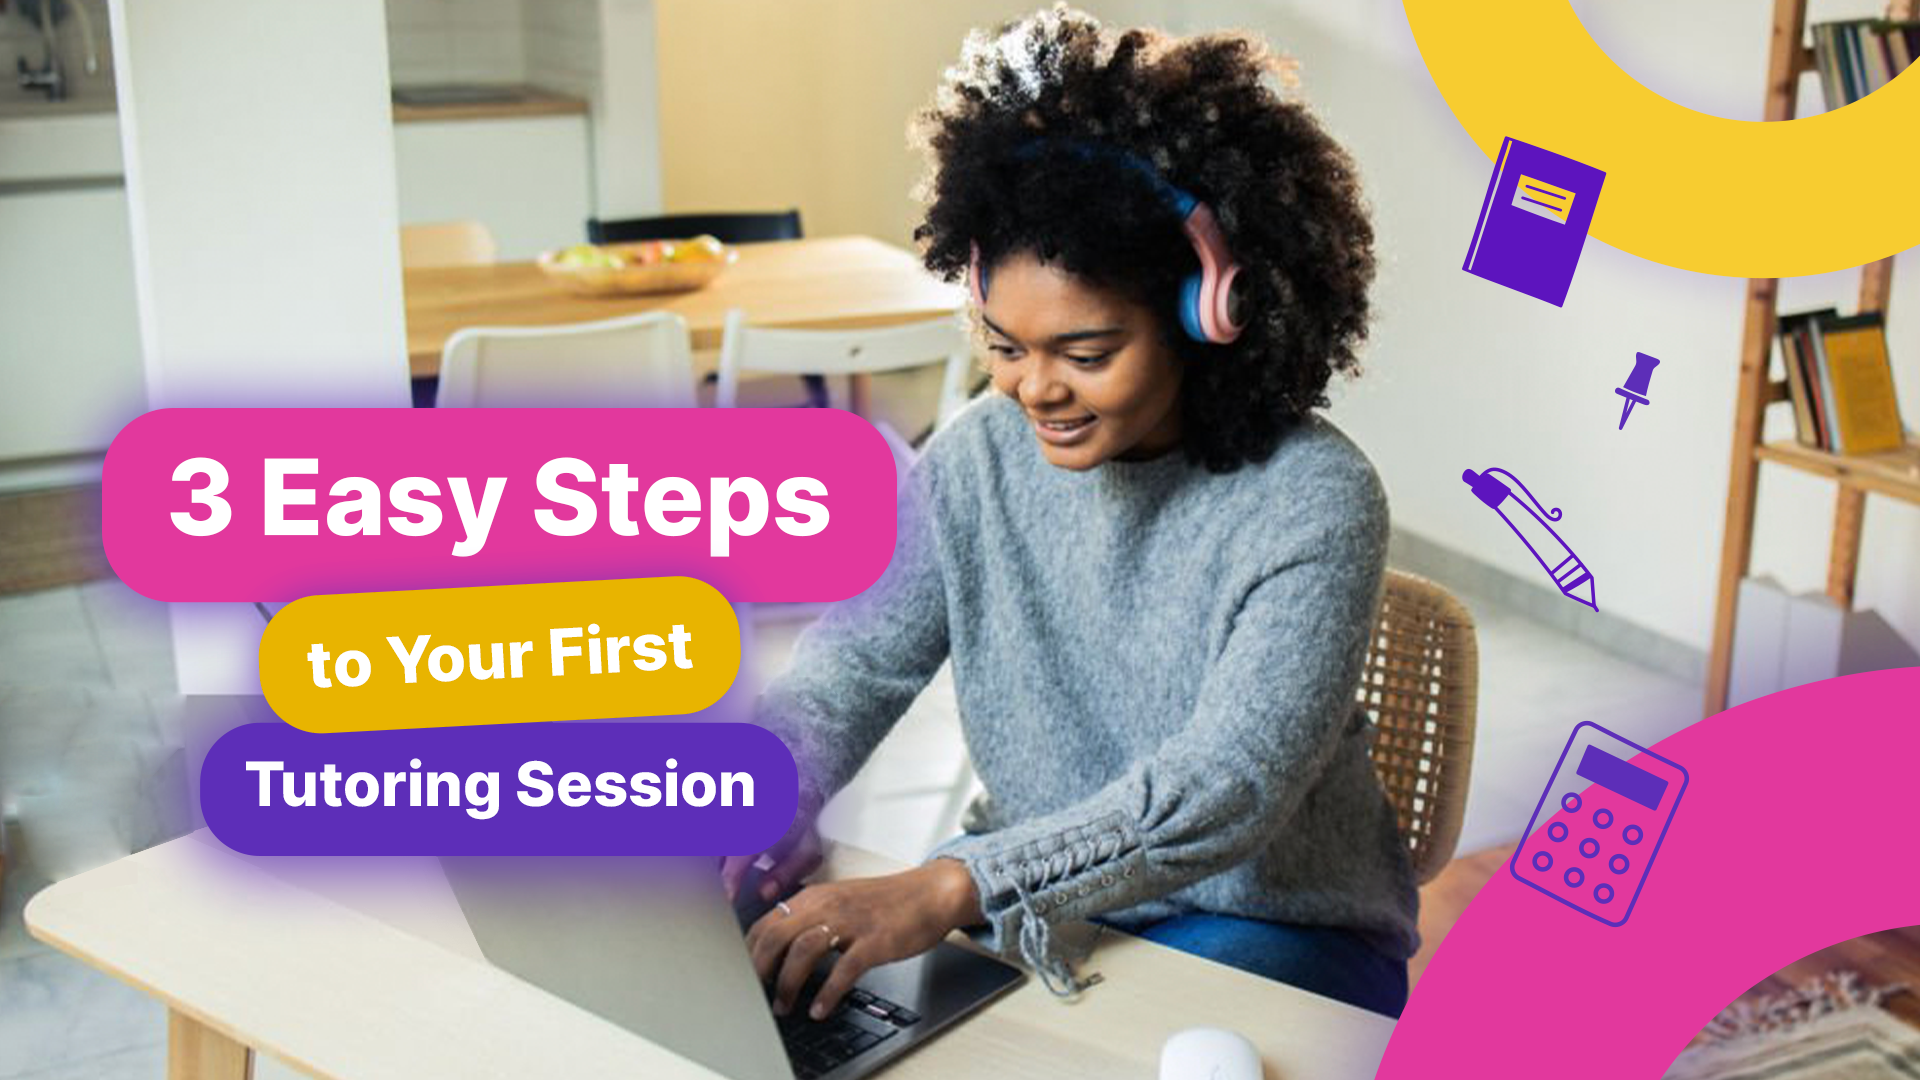 Booking Your First Tutoring Session in 3 Easy Steps